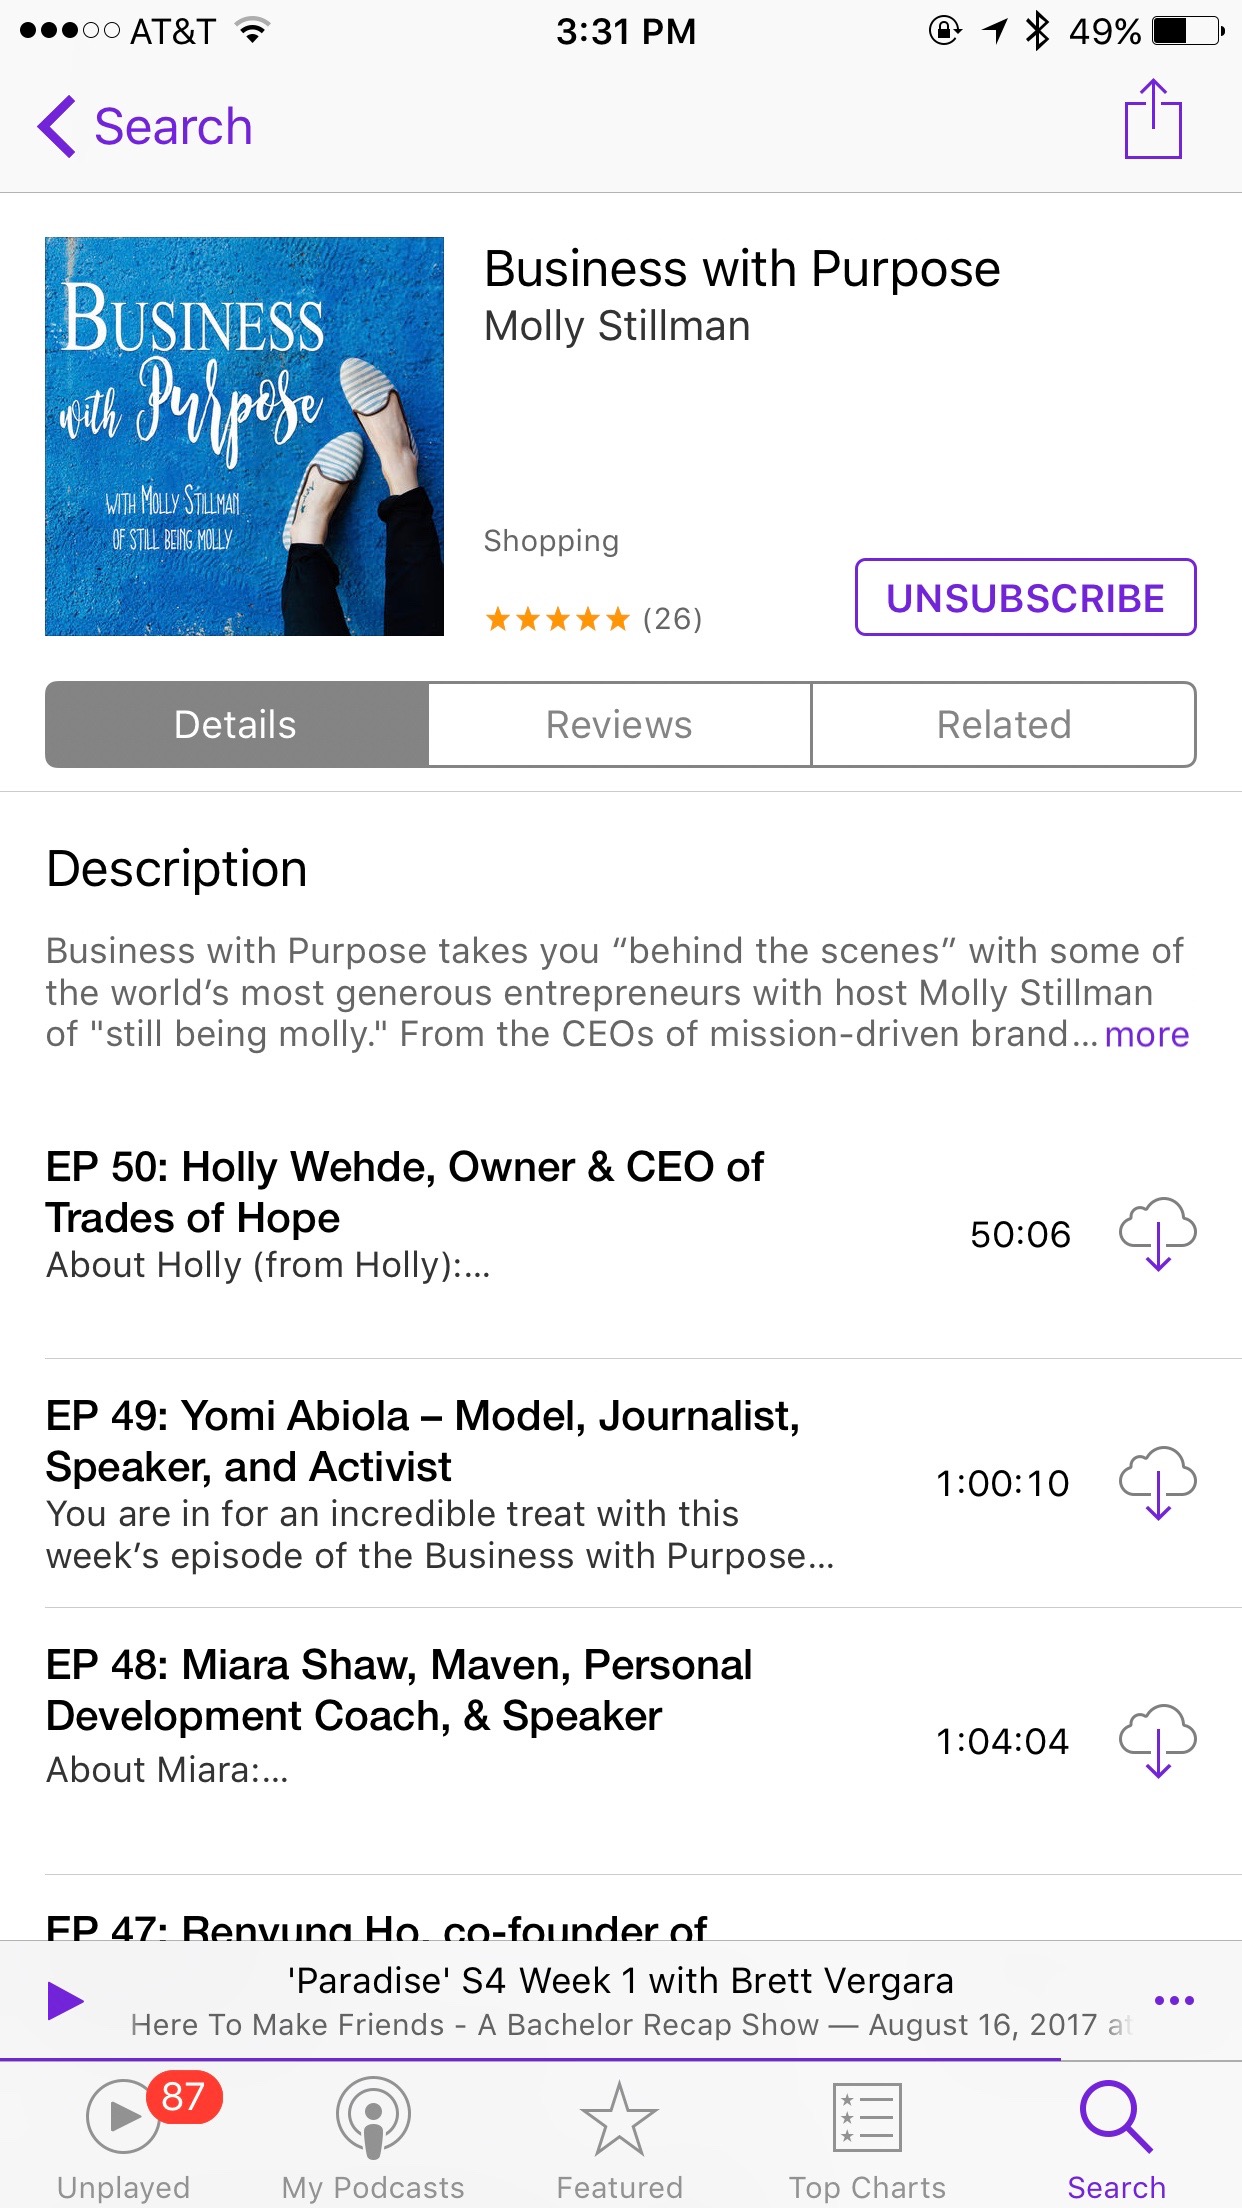 How to Listen and Subscribe to a Podcast by NC blogger and podcaster Still Being Molly